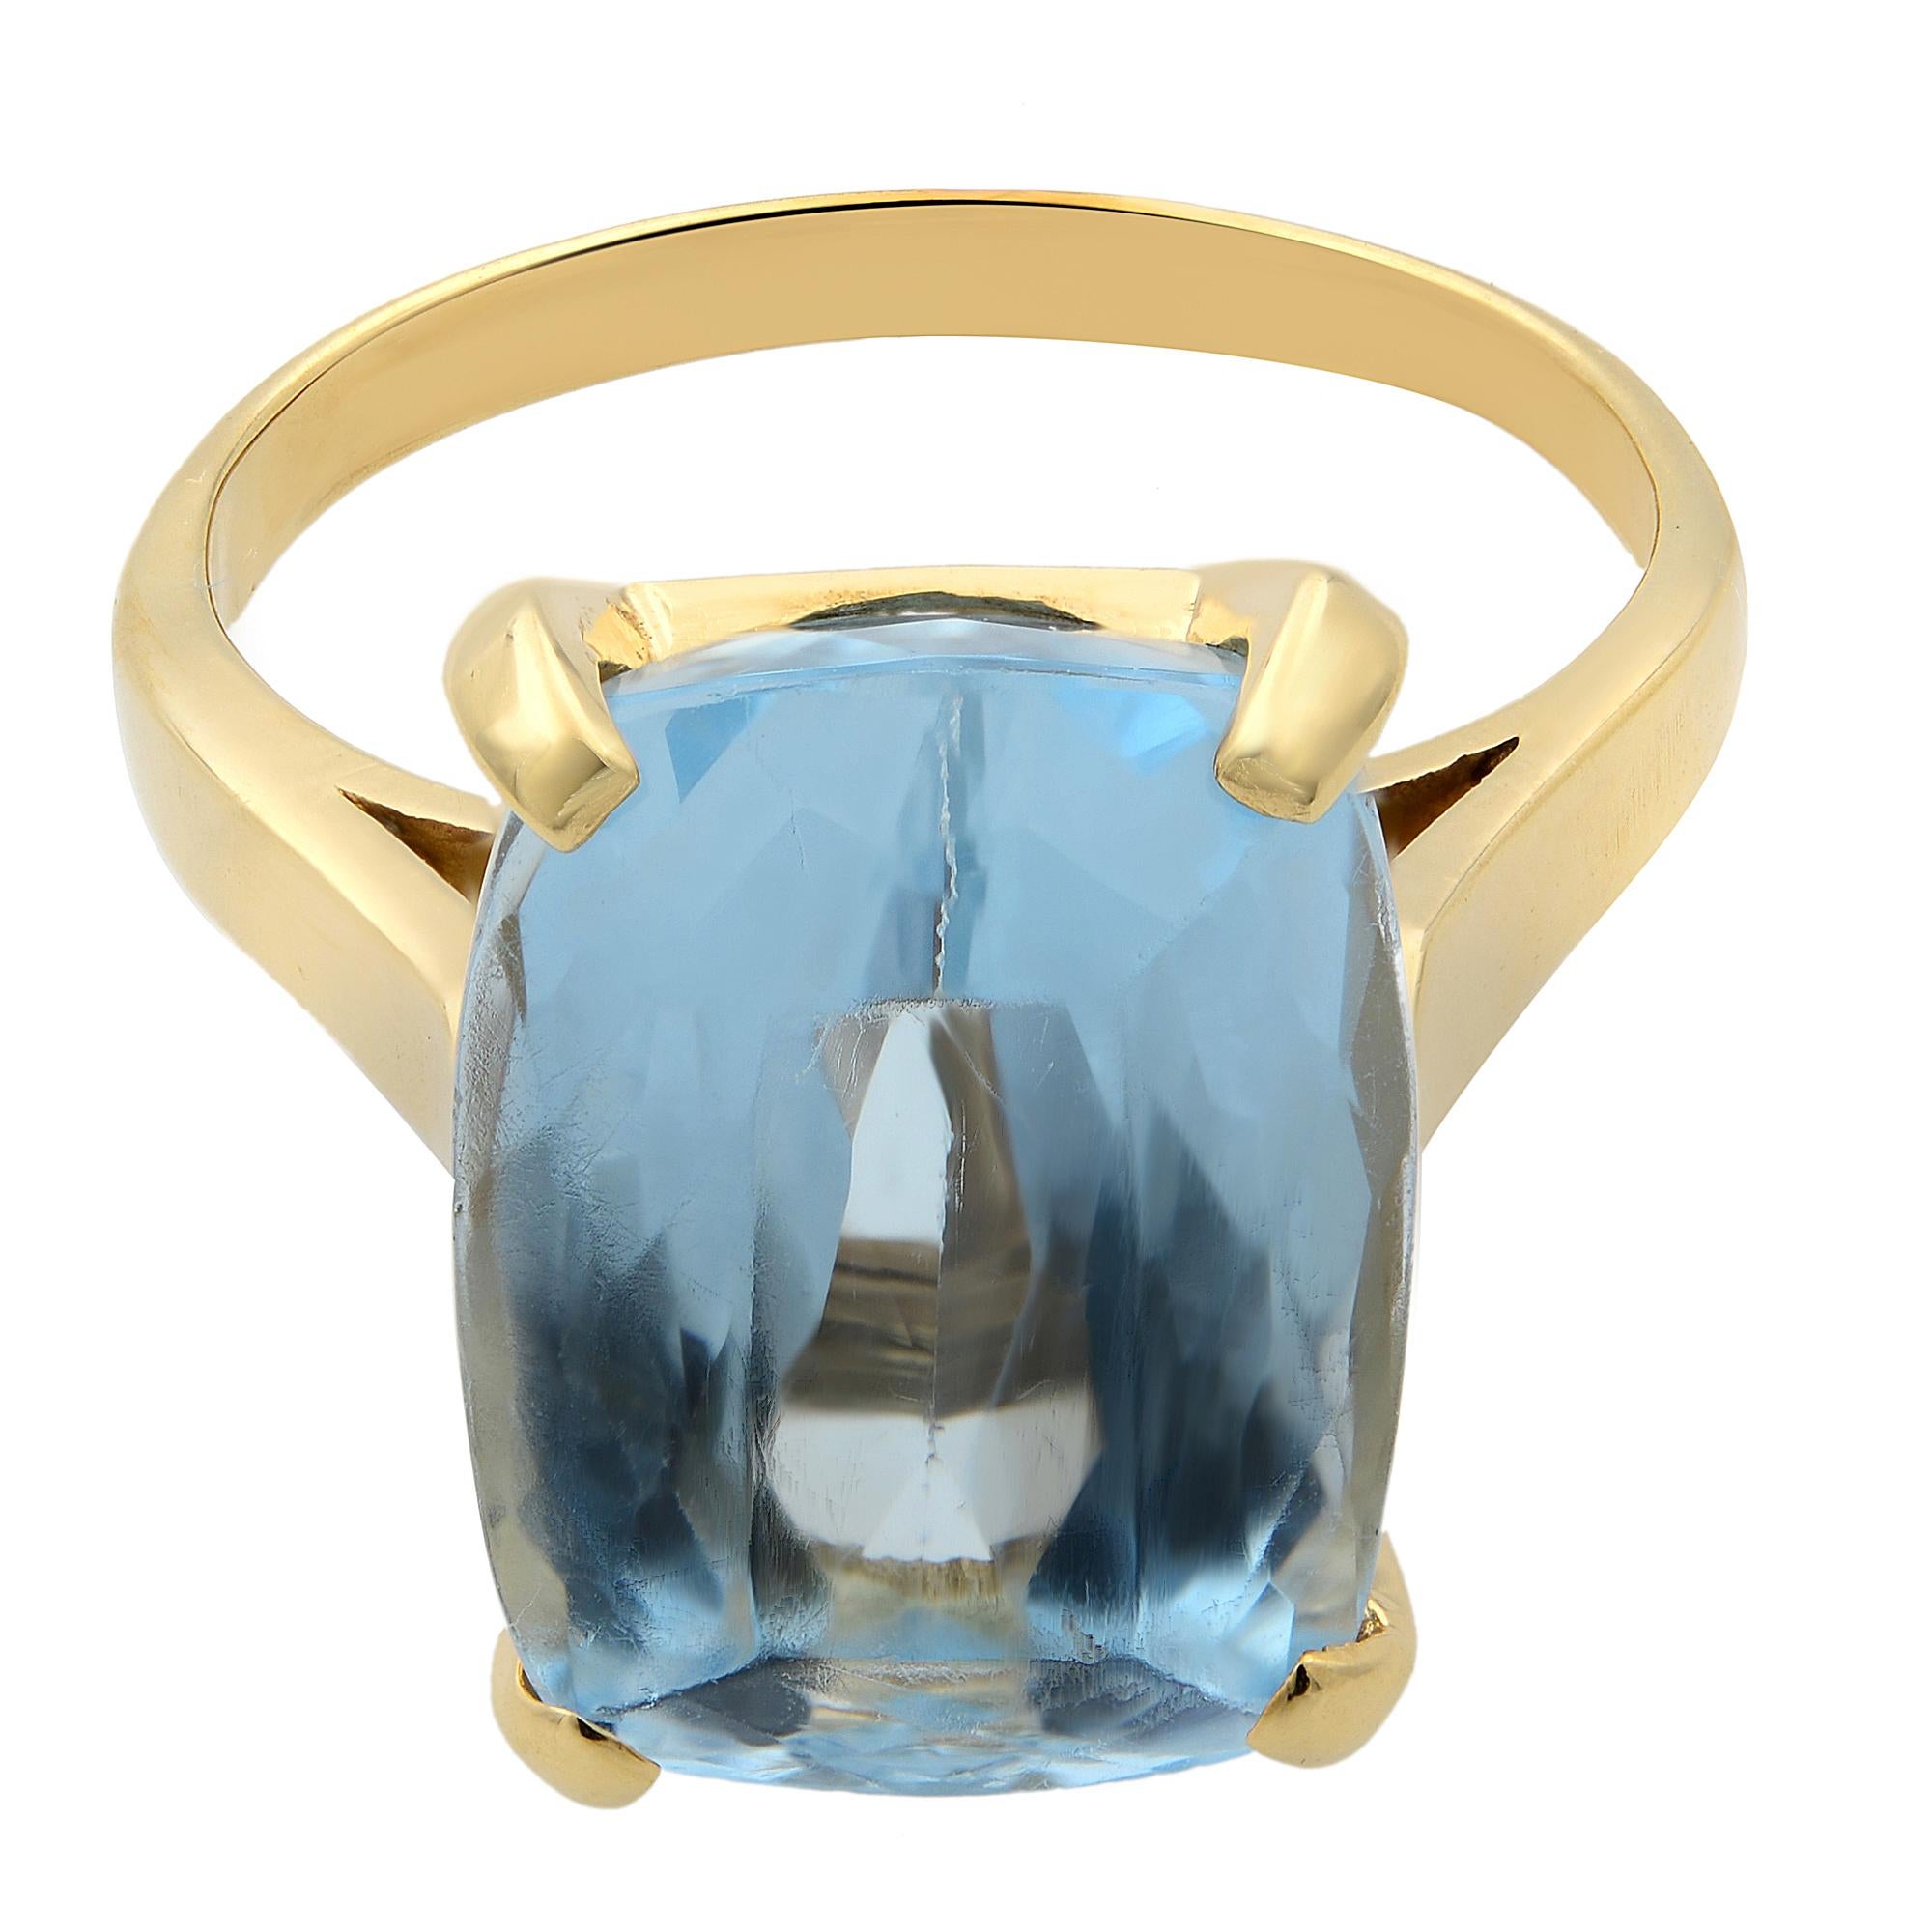 This ring features a large 7.00 carat blue topaz cushion cut gem in a solitaire cathedral prong setting.Crafted in 14k yellow gold. Ring size 8.25. Pre-owned condition. Comes in a delicate jewelry box.  